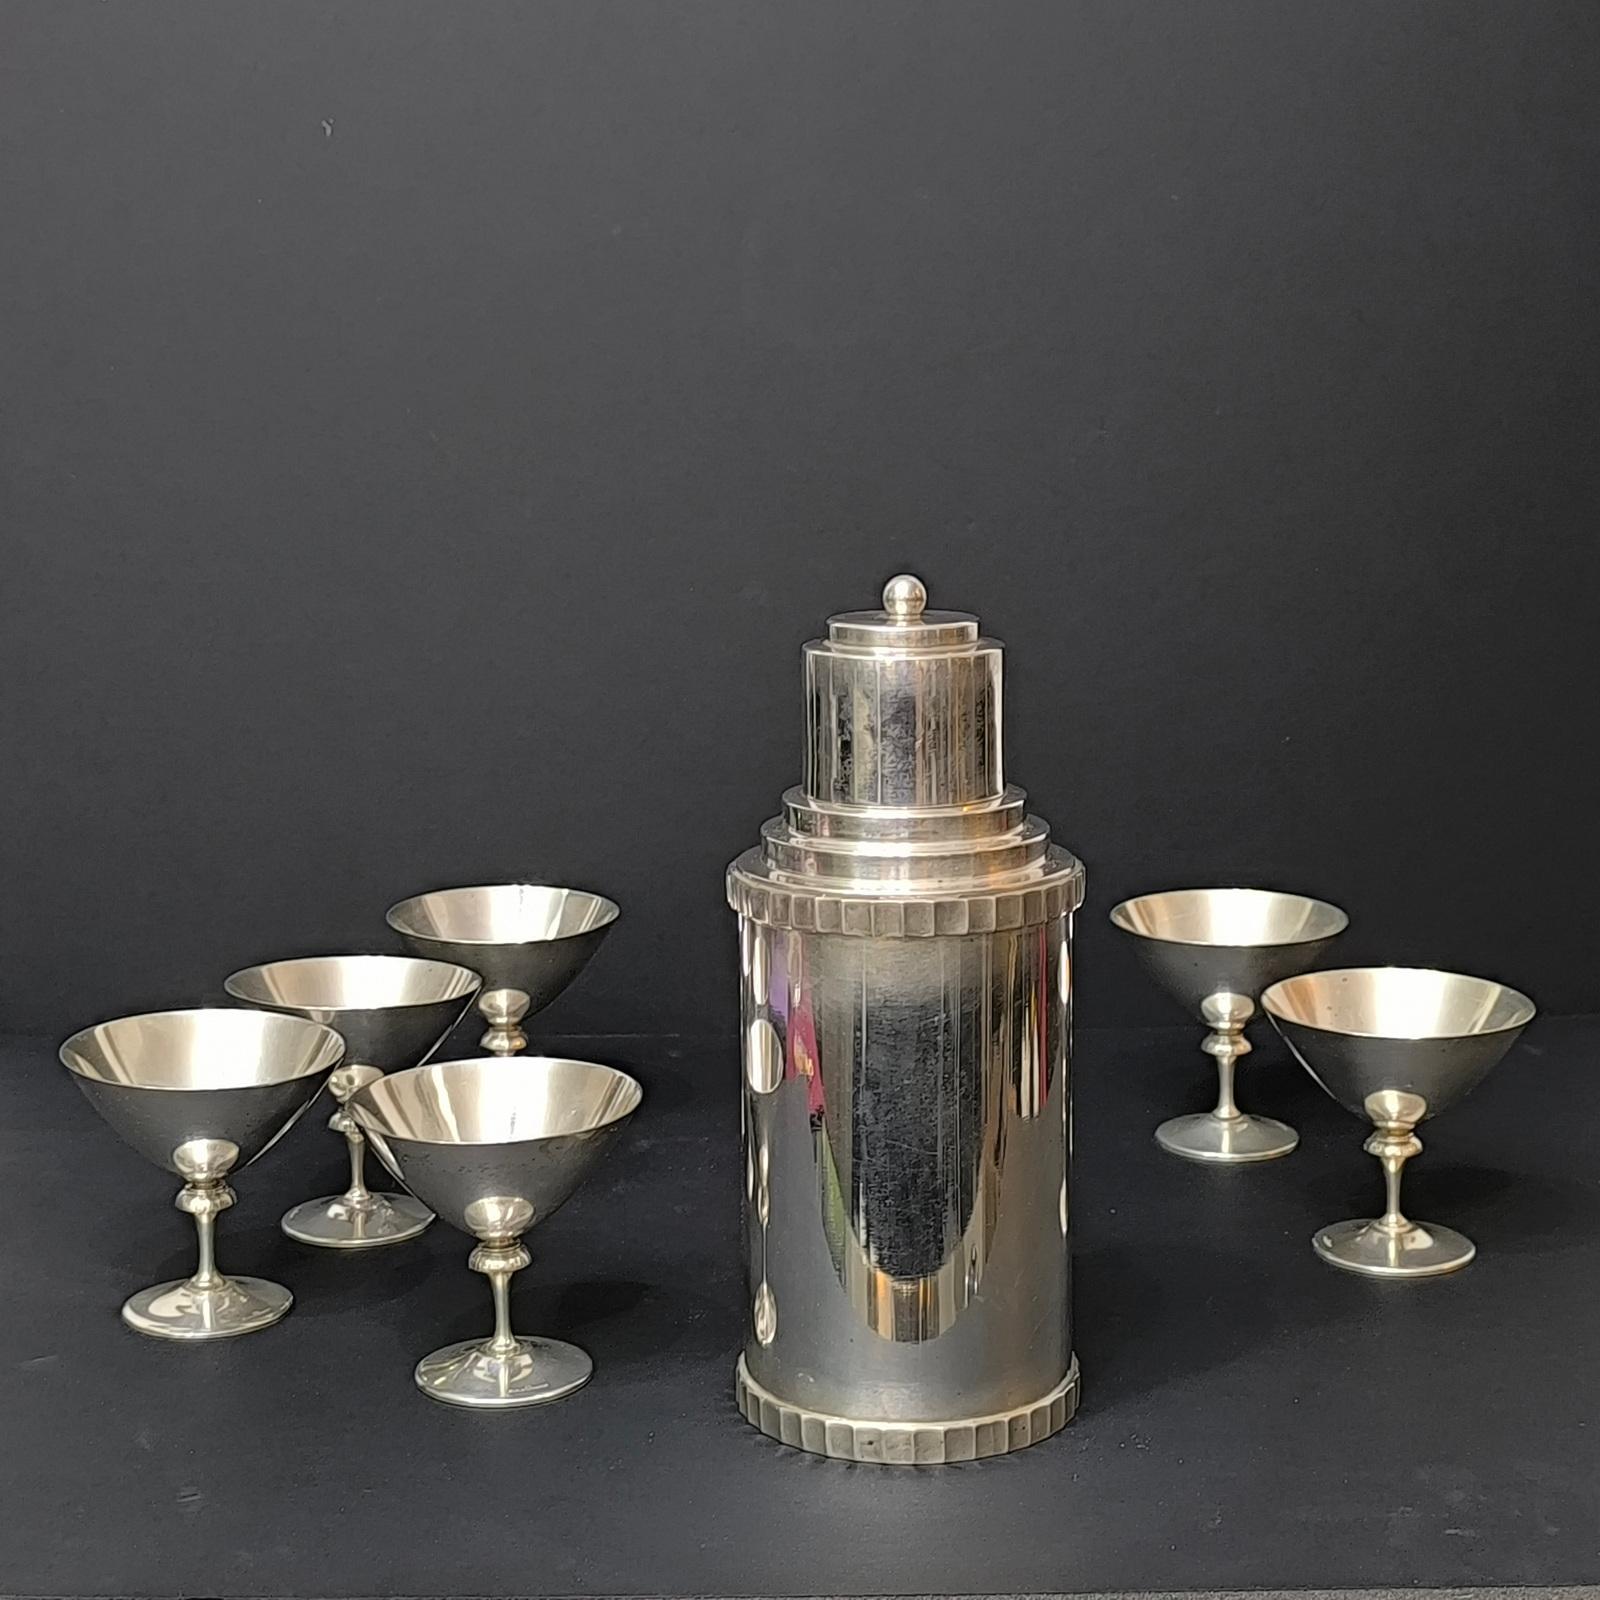 Art Deco Danish Silver Plated Cocktail Shaker and Six GAB Martini Glasses.
A gorgeous bar set comprising a heavy, high-quality Danish silver-plated cocktail shaker and six Martini stem glasses by GAB Sweden.
All are in very good used condition, with